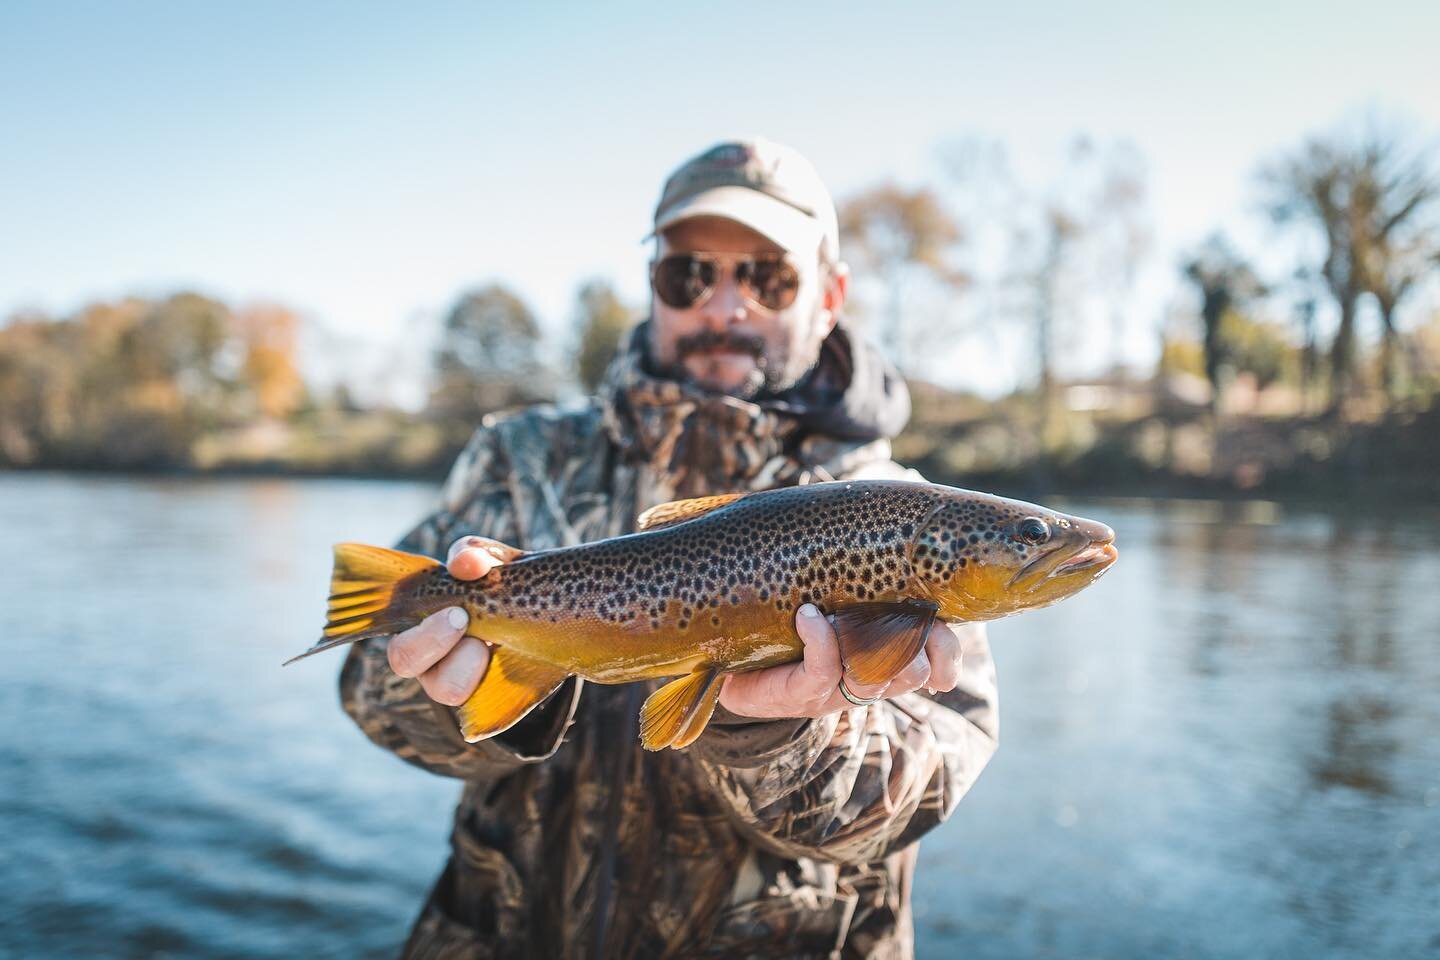 We are starting to see a few browns all colored up for the big dance! Cool weather, no crowds, and great fishing is what the fall is all about!